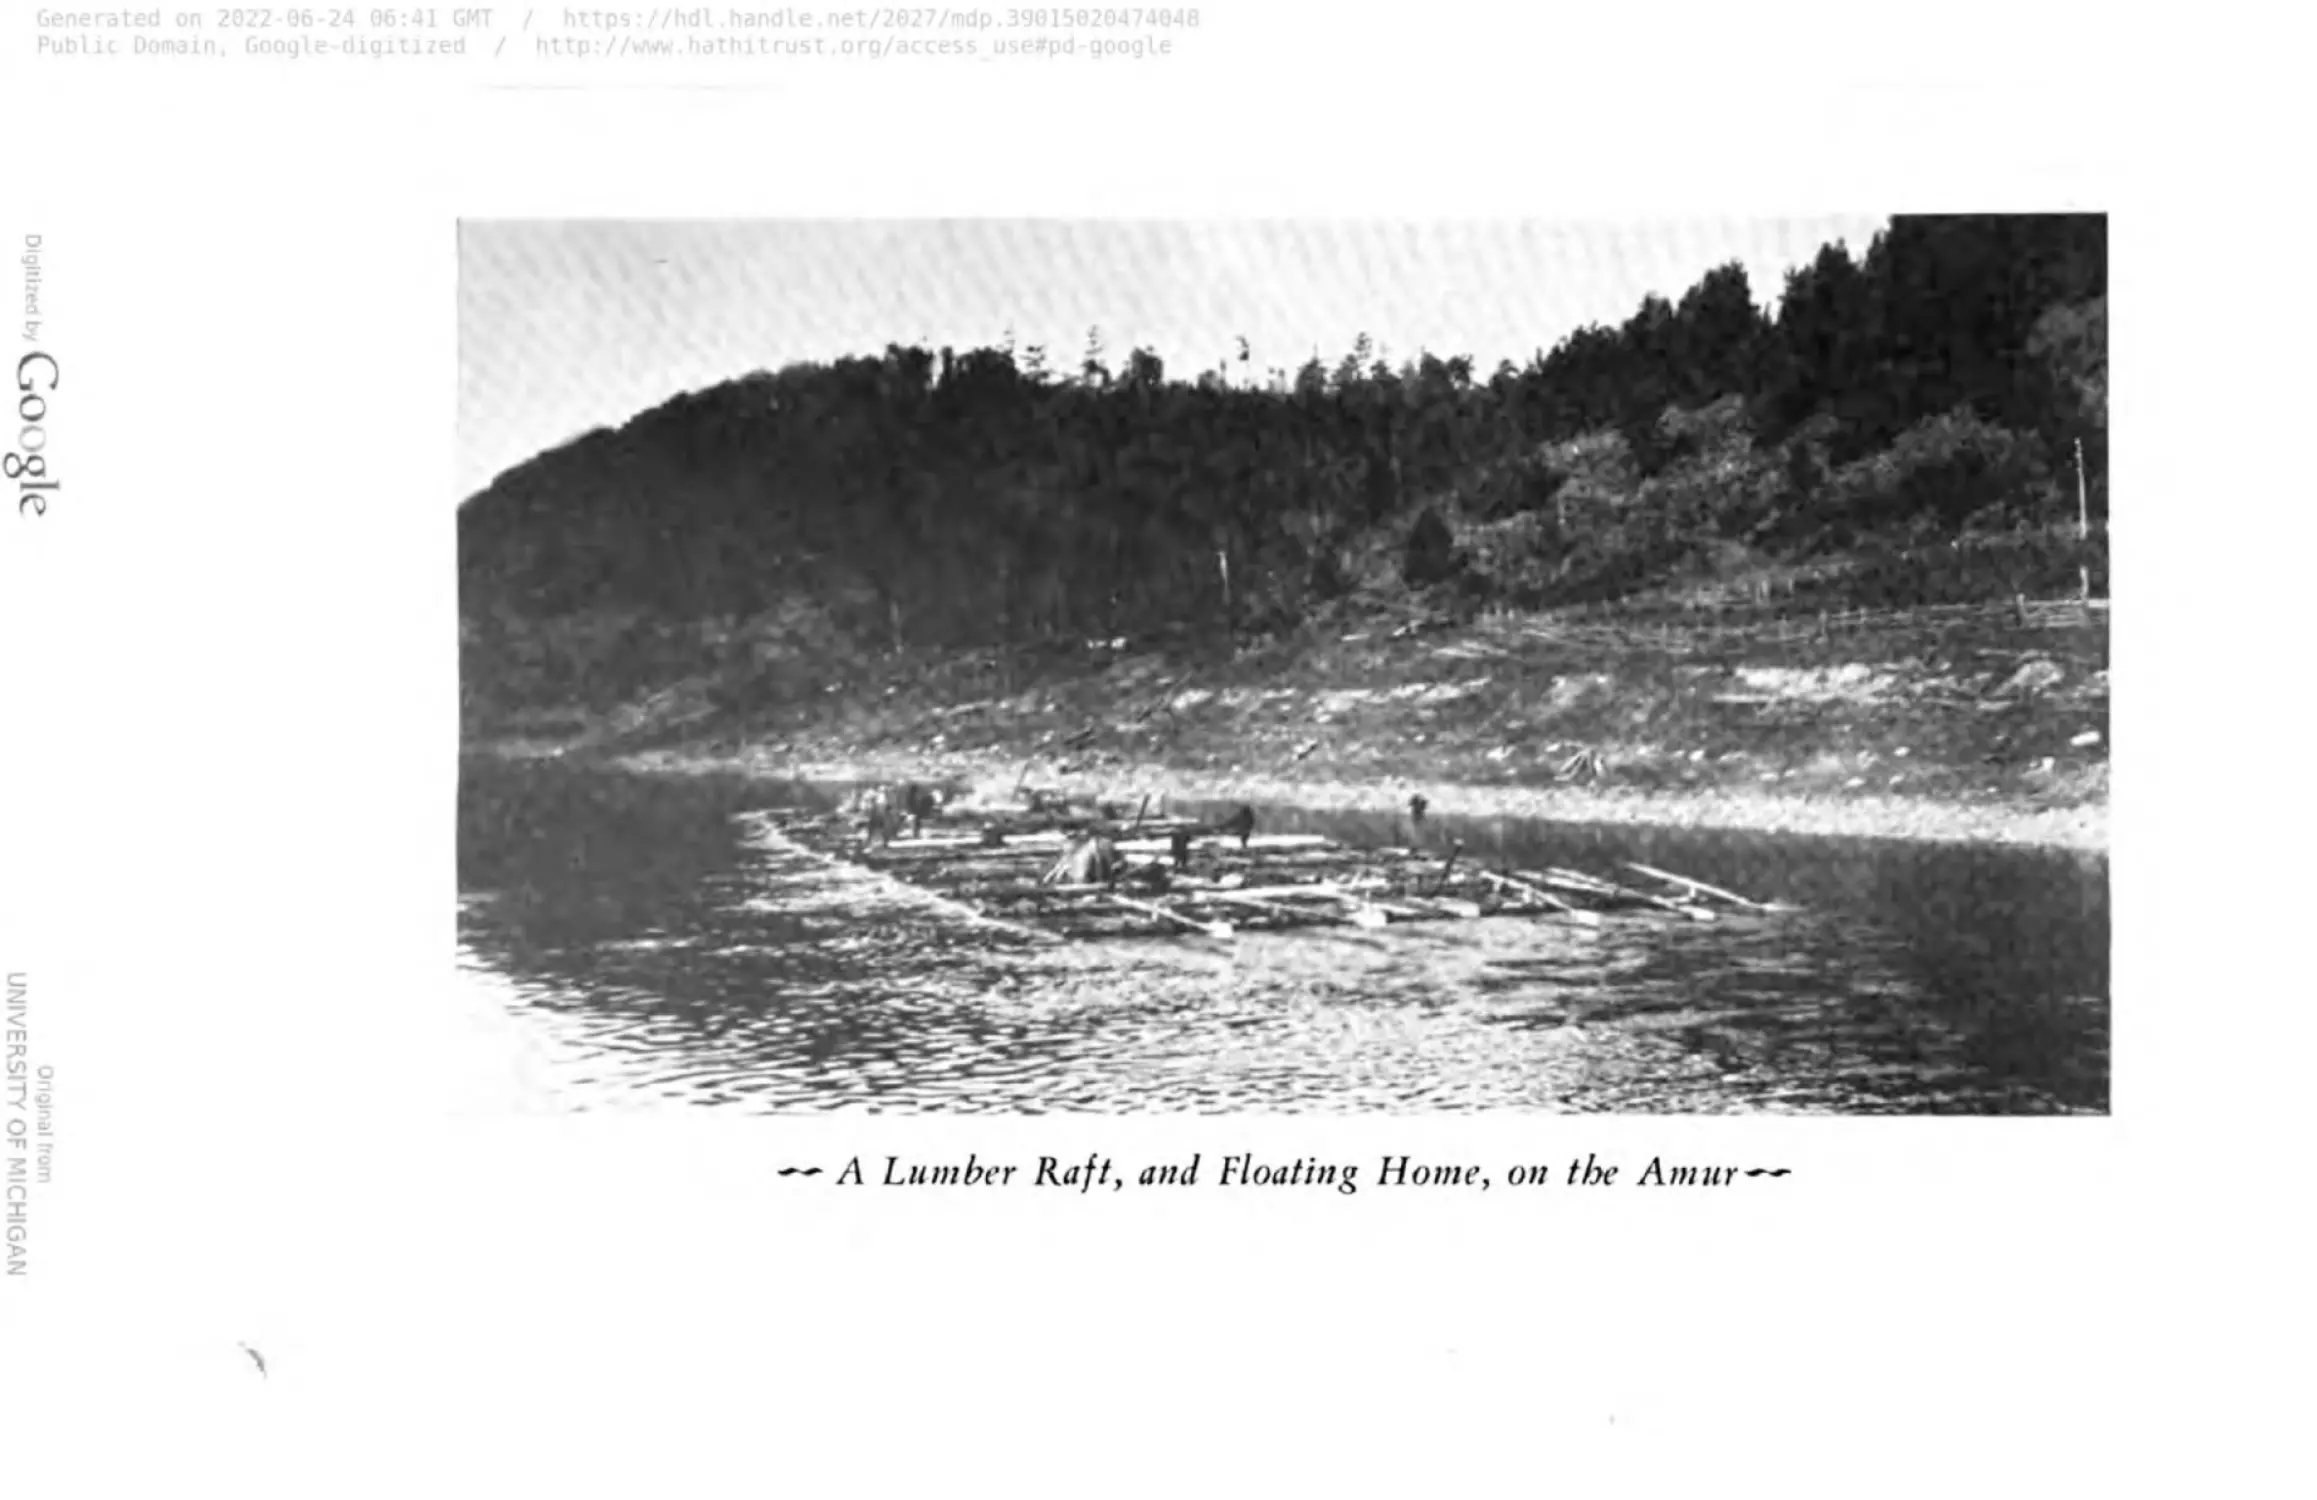 A Lumber Raft, and Floating Home, on the Amur